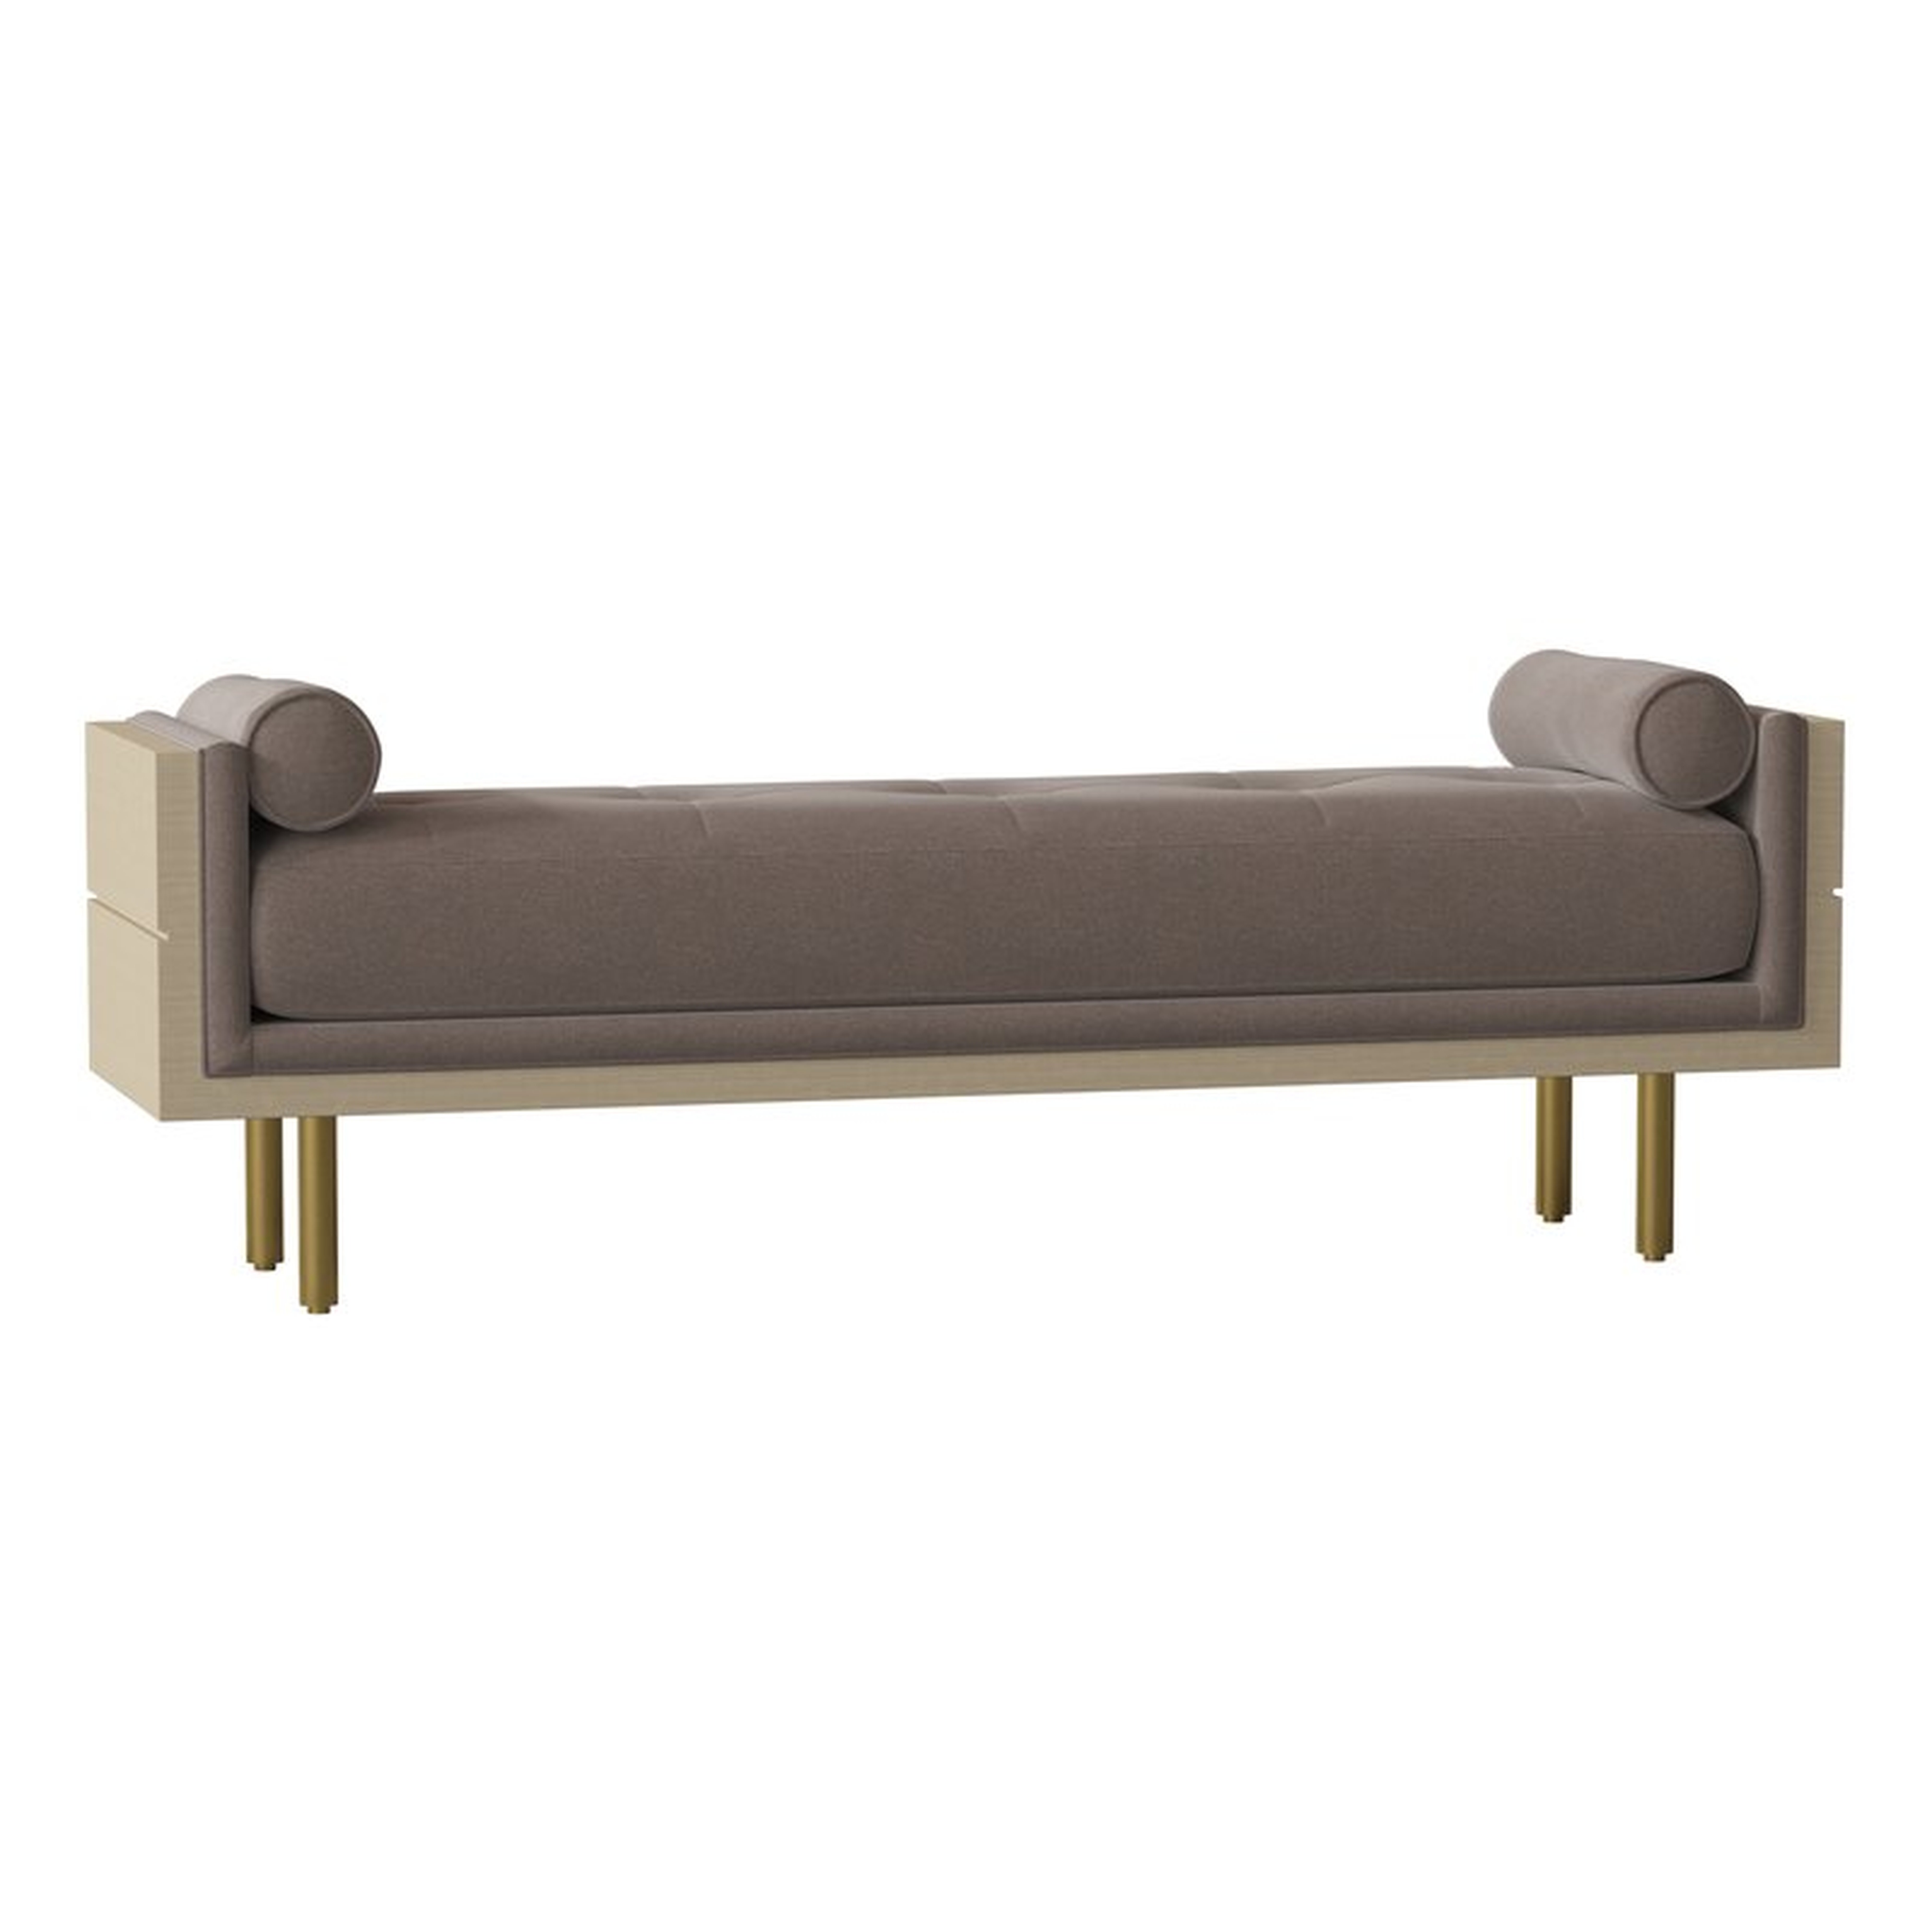 Maria Yee Maxwell Upholstered Bench Body Fabric: Fall Mist, Frame Color: Ash Dove, Leg Color: Antique Brass - Perigold